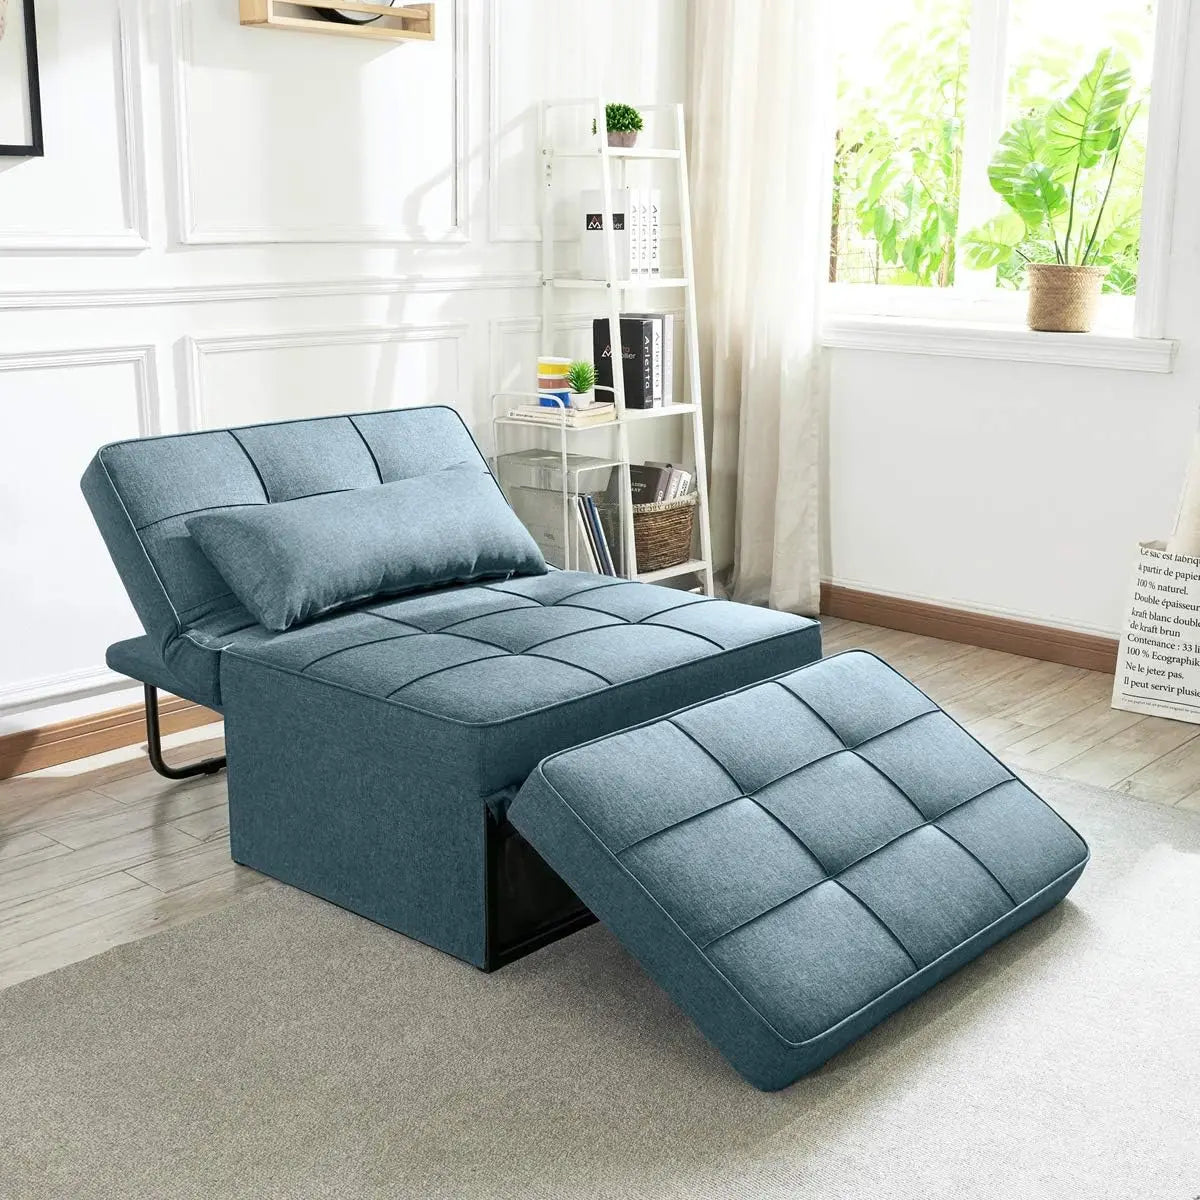 FOLDABLE SOFA EASYREST(BUY 2 GET 1 FREE ! FREE SHIPPING)